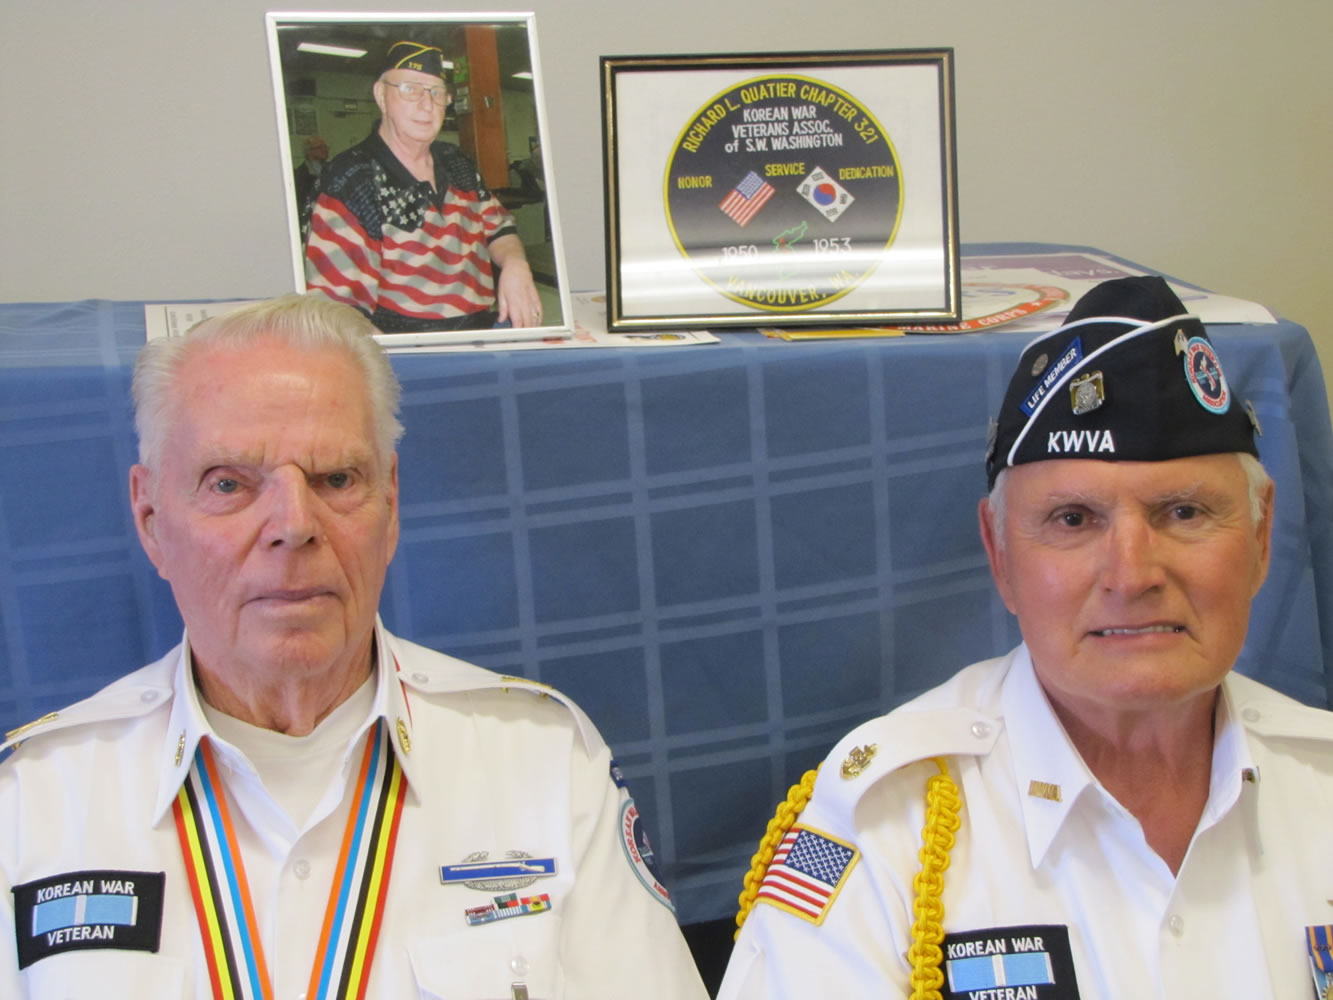 Carl Hissman, left, and James Mead have been chosen to participate in events commemorating the 60th anniversary of the Korean War's cease-fire.